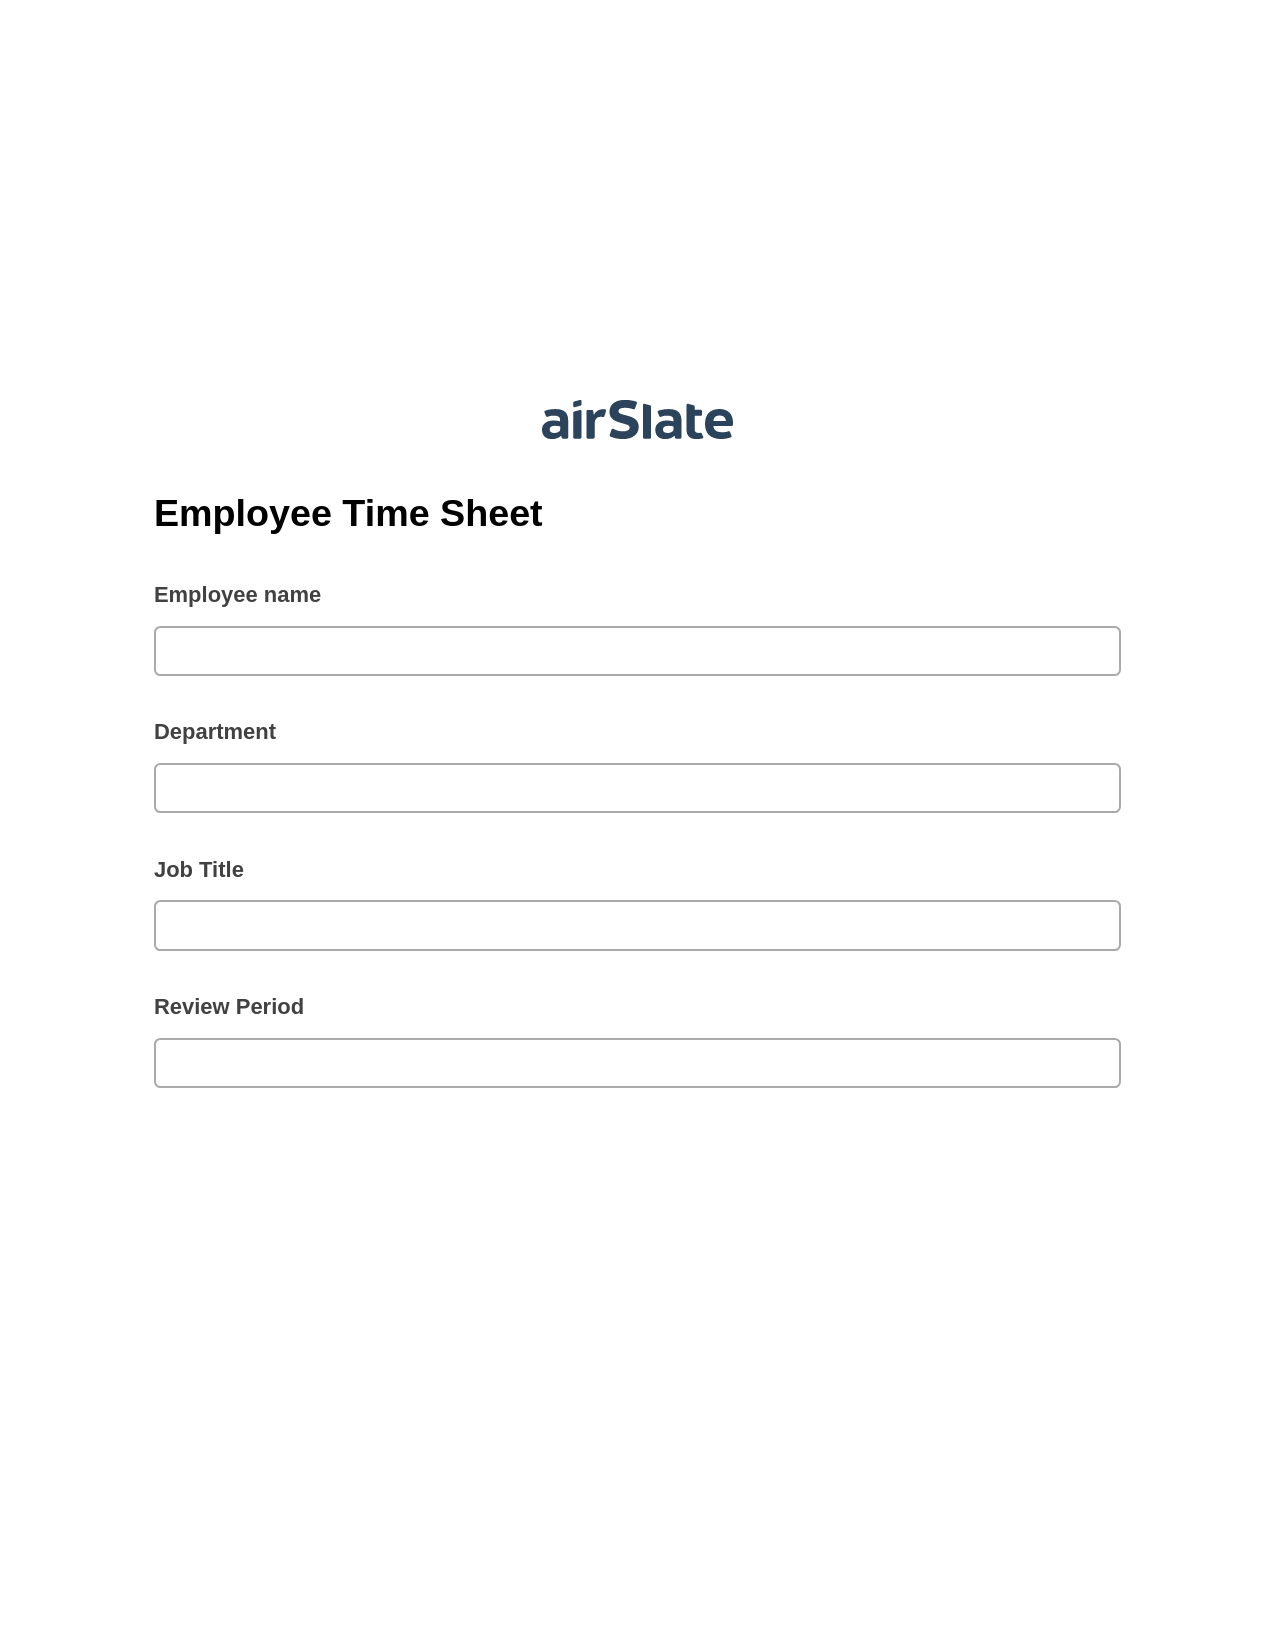 Multirole Employee Time Sheet Pre-fill Dropdowns from Office 365 Excel Bot, Update Audit Trail Bot, Export to Smartsheet